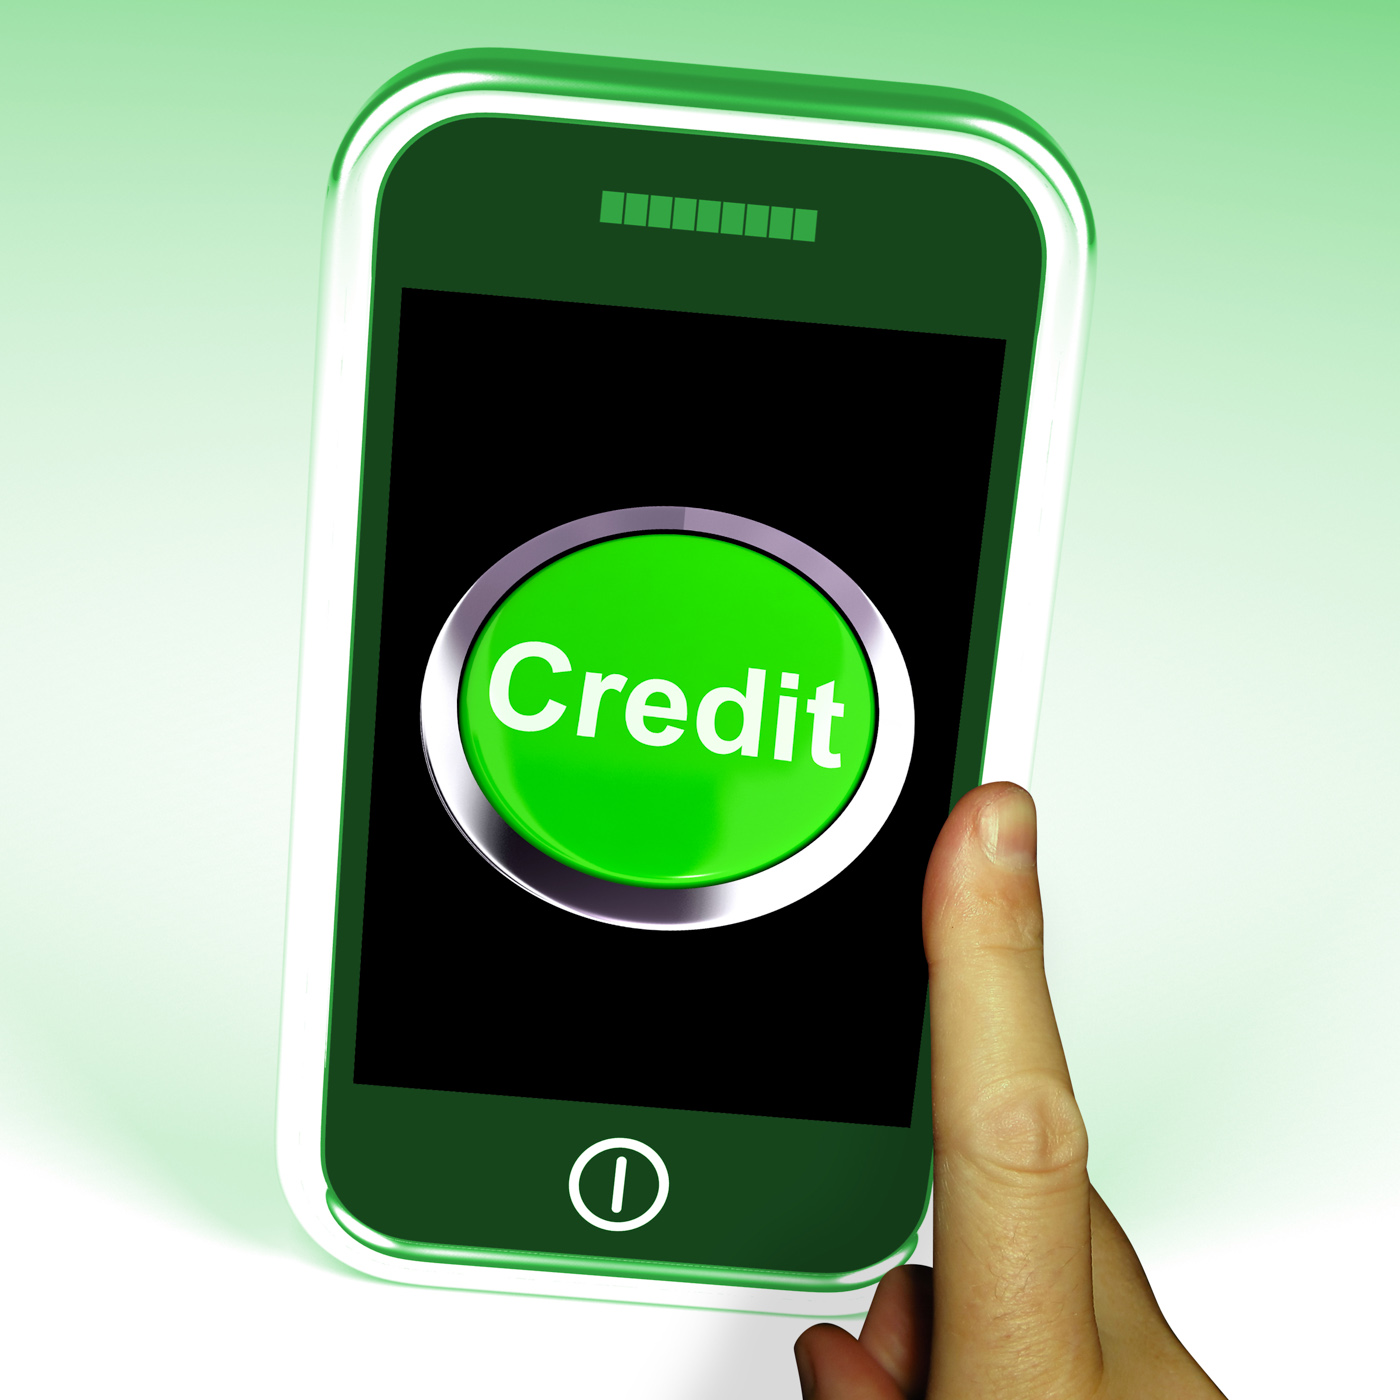 Credit Button On Mobile Shows Finance Or Loan For Purchases, Internet, Web, Smartphone, Phone, HQ Photo